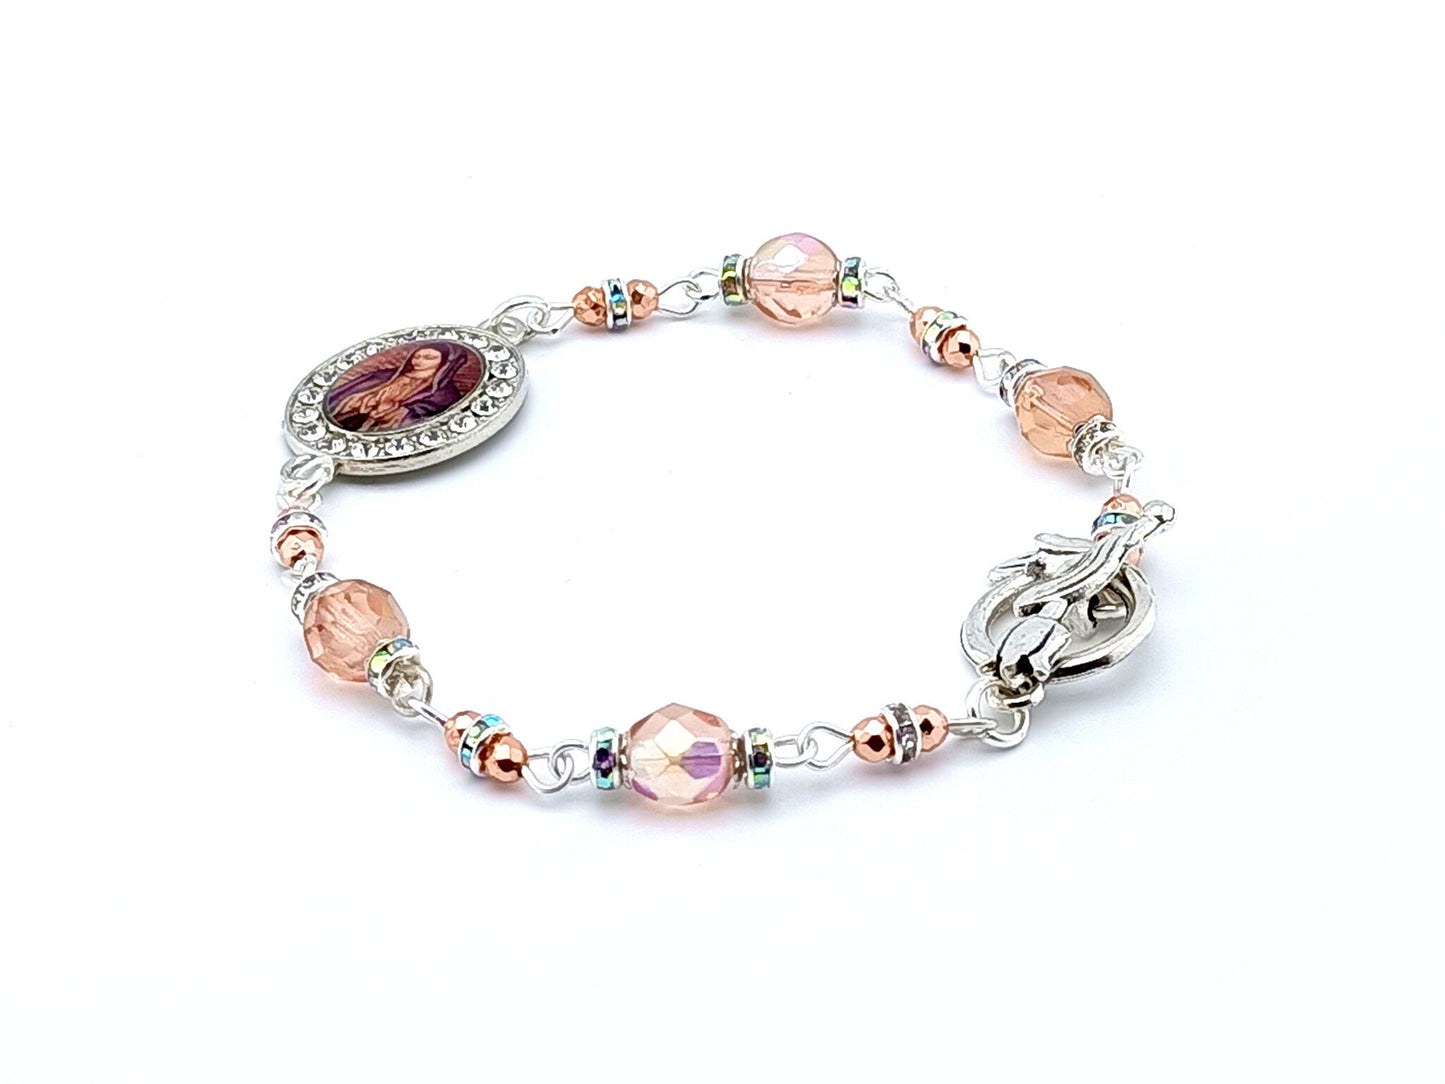 Our Lady of Guadalupe unique rosary beads bracelet with amber glass beads, silver clasp and picture medal.